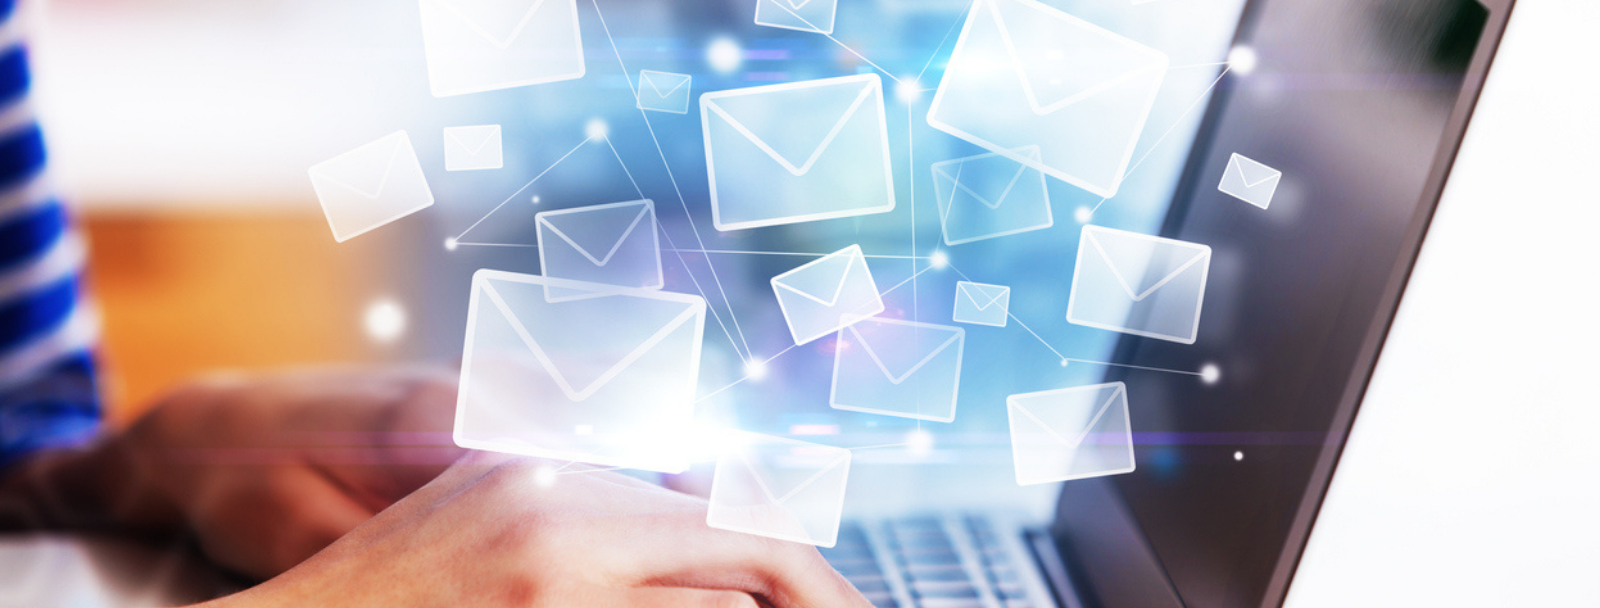 Email Marketing Strategy & Execution at UNH